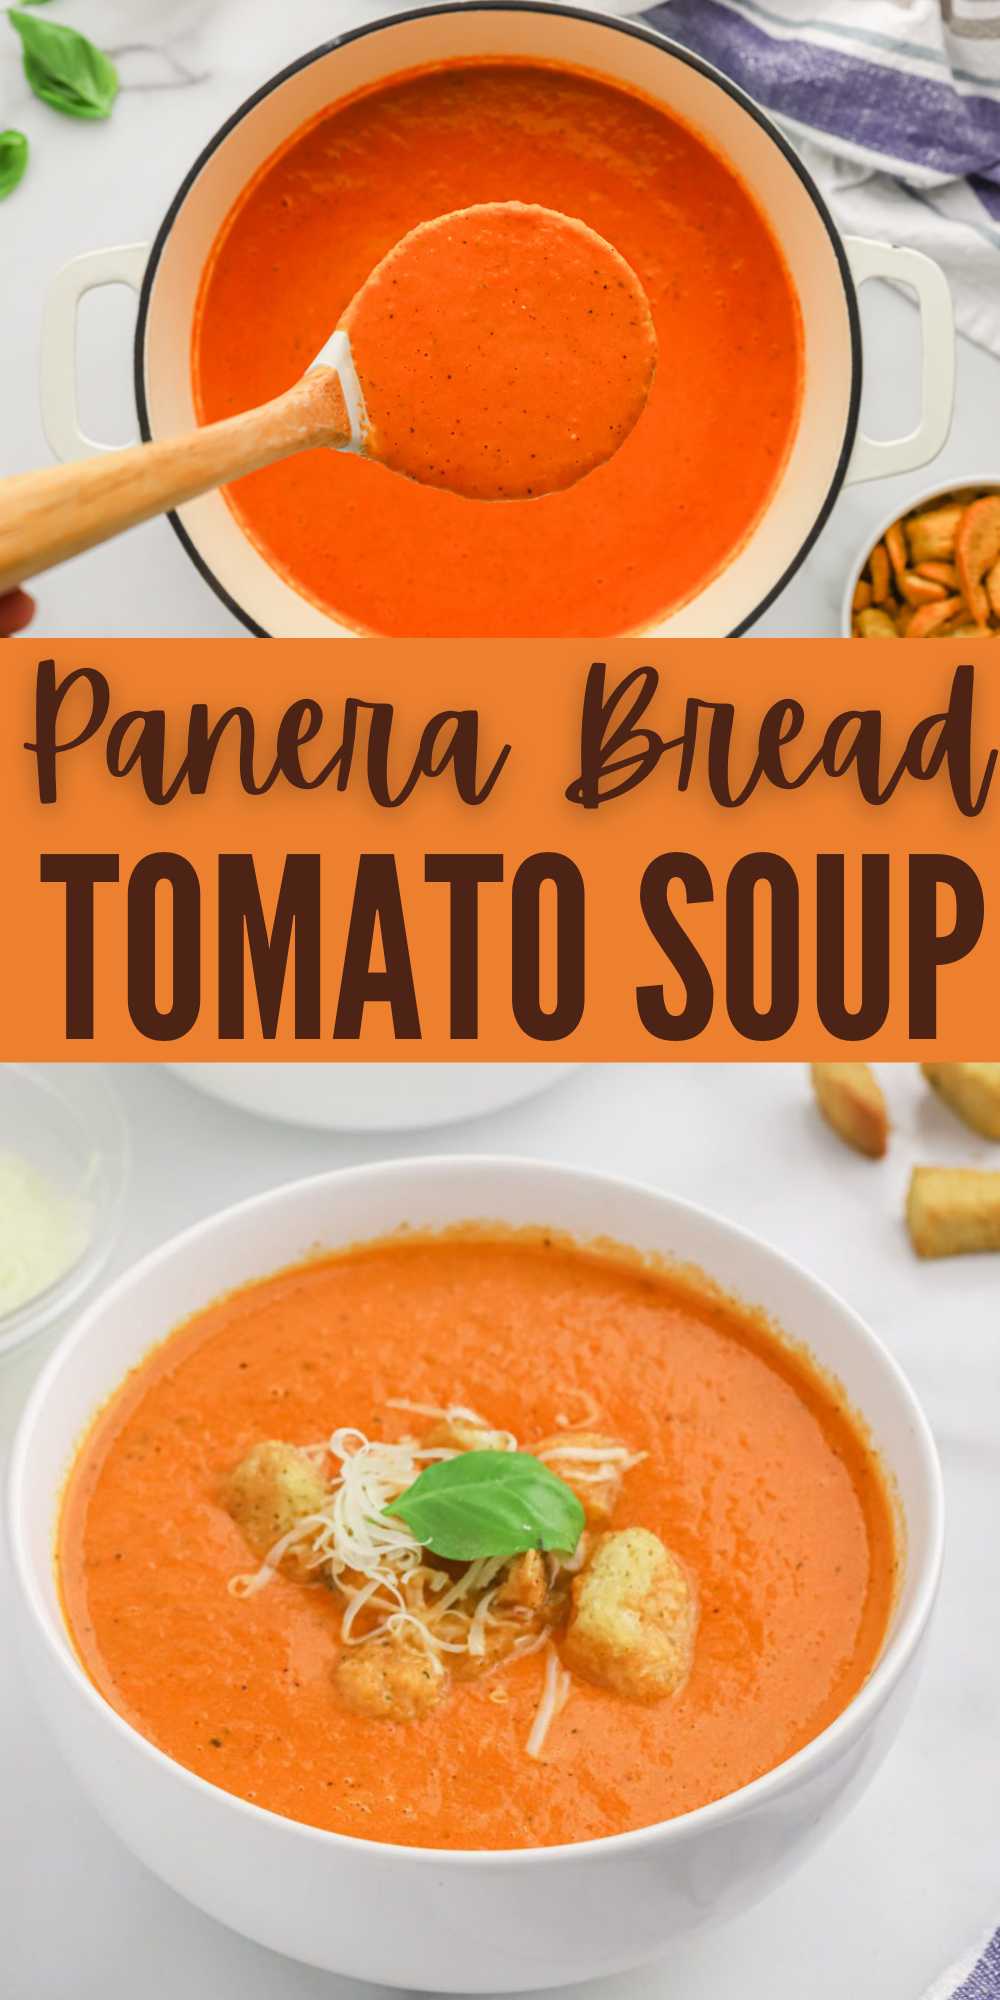 We love this creamy Panera Bread Tomato Soup copycat recipe. It is delicious and easy to make. Simple ingredients makes this soup flavorful. Learn how to make this delicious Panera Bread Tomato Soup.  #eatingonadime #panerabreadtomatosoup #copcatrecipes #tomatosoup